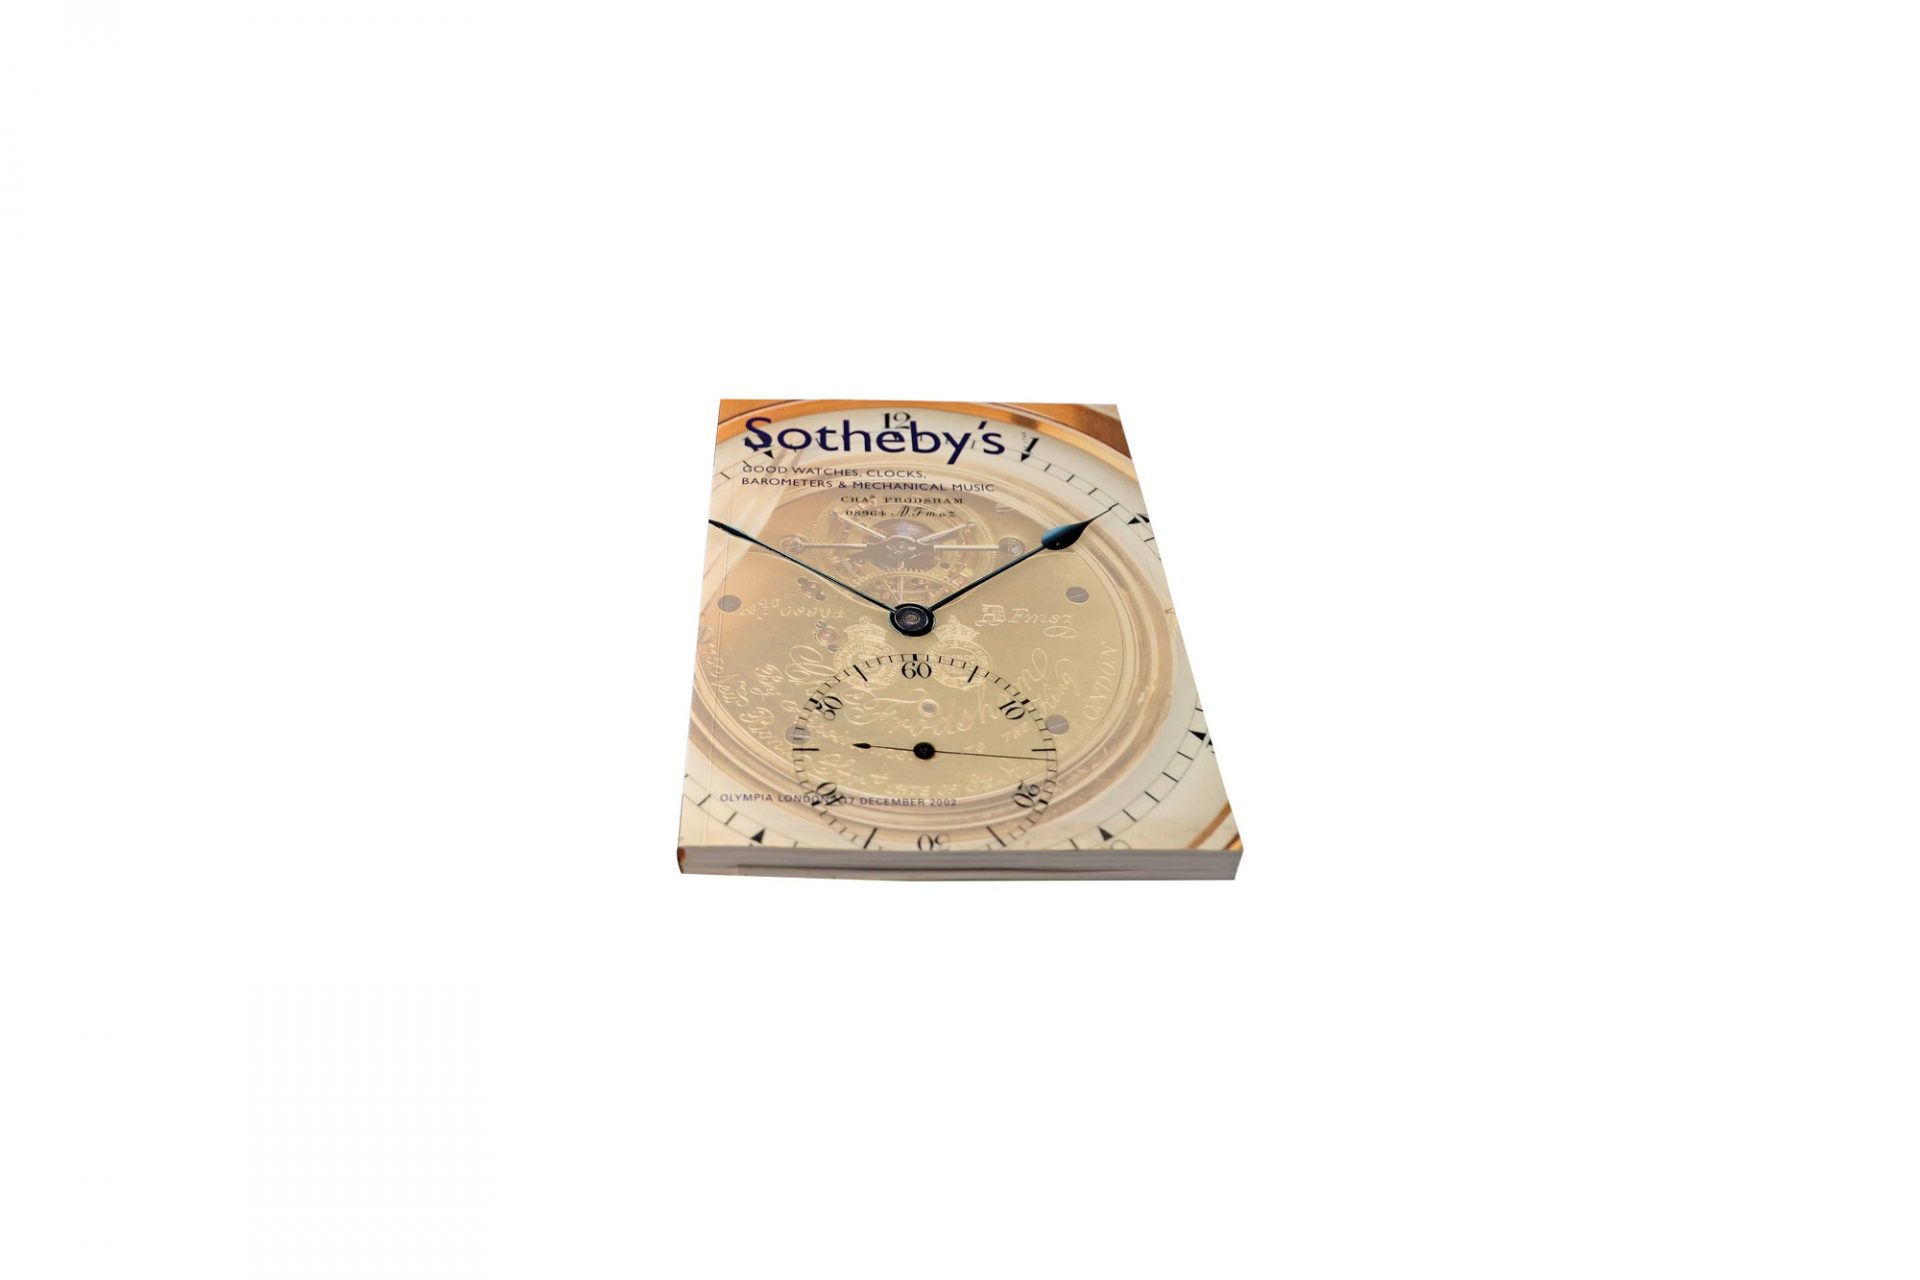 Sotheby's Good Watches, Clocks, Barometers And Mechanical Music Landon December 7, 2002 Auction Catalog - Rare Watch Parts